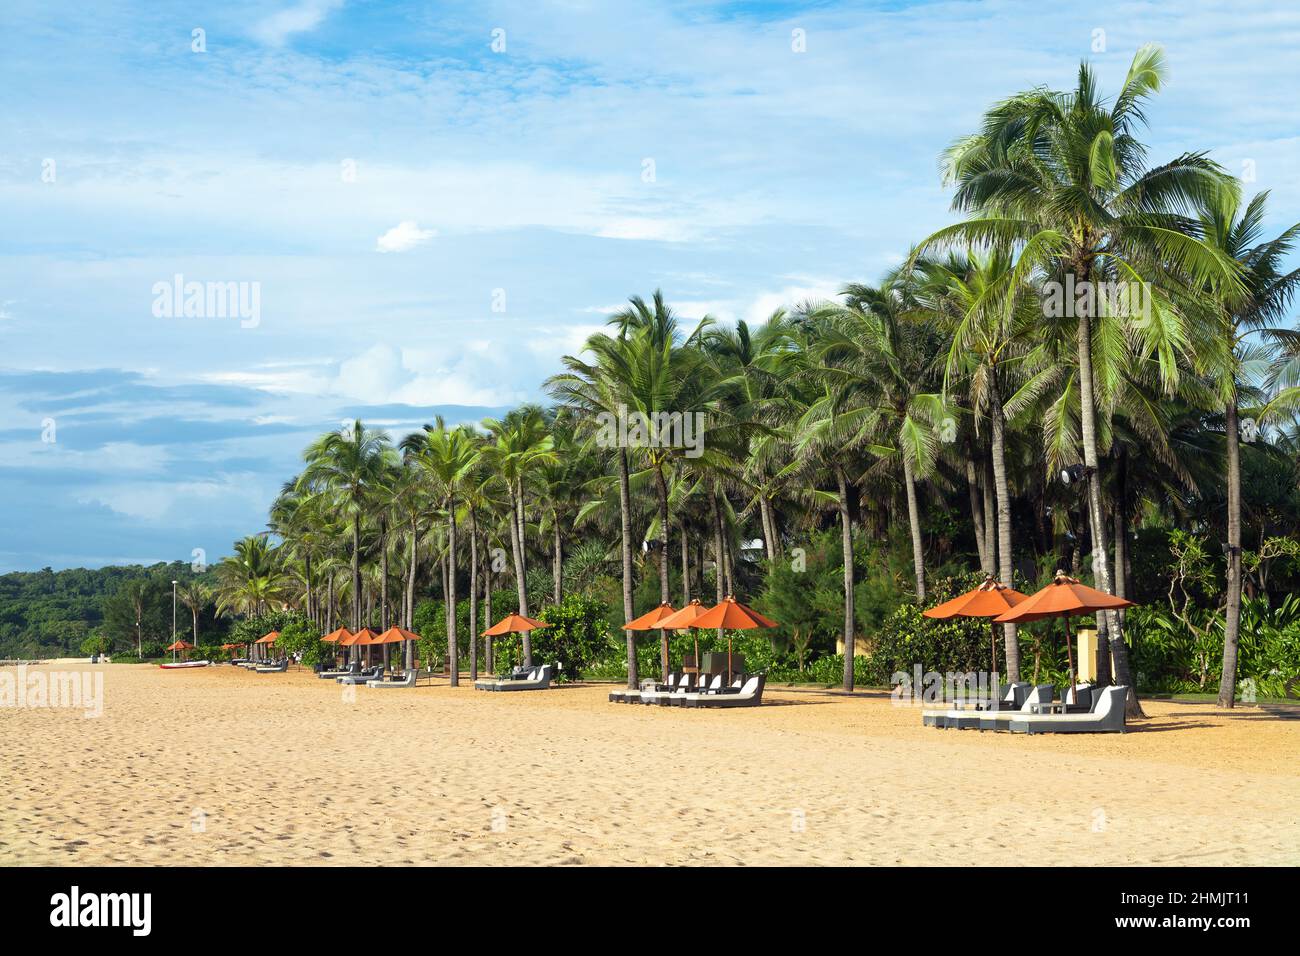 Empty beach with umbrellas and deck chairs. Palm trees. Beautiful summertime view seascape. Relax places island Bali island, Indonesia Stock Photo